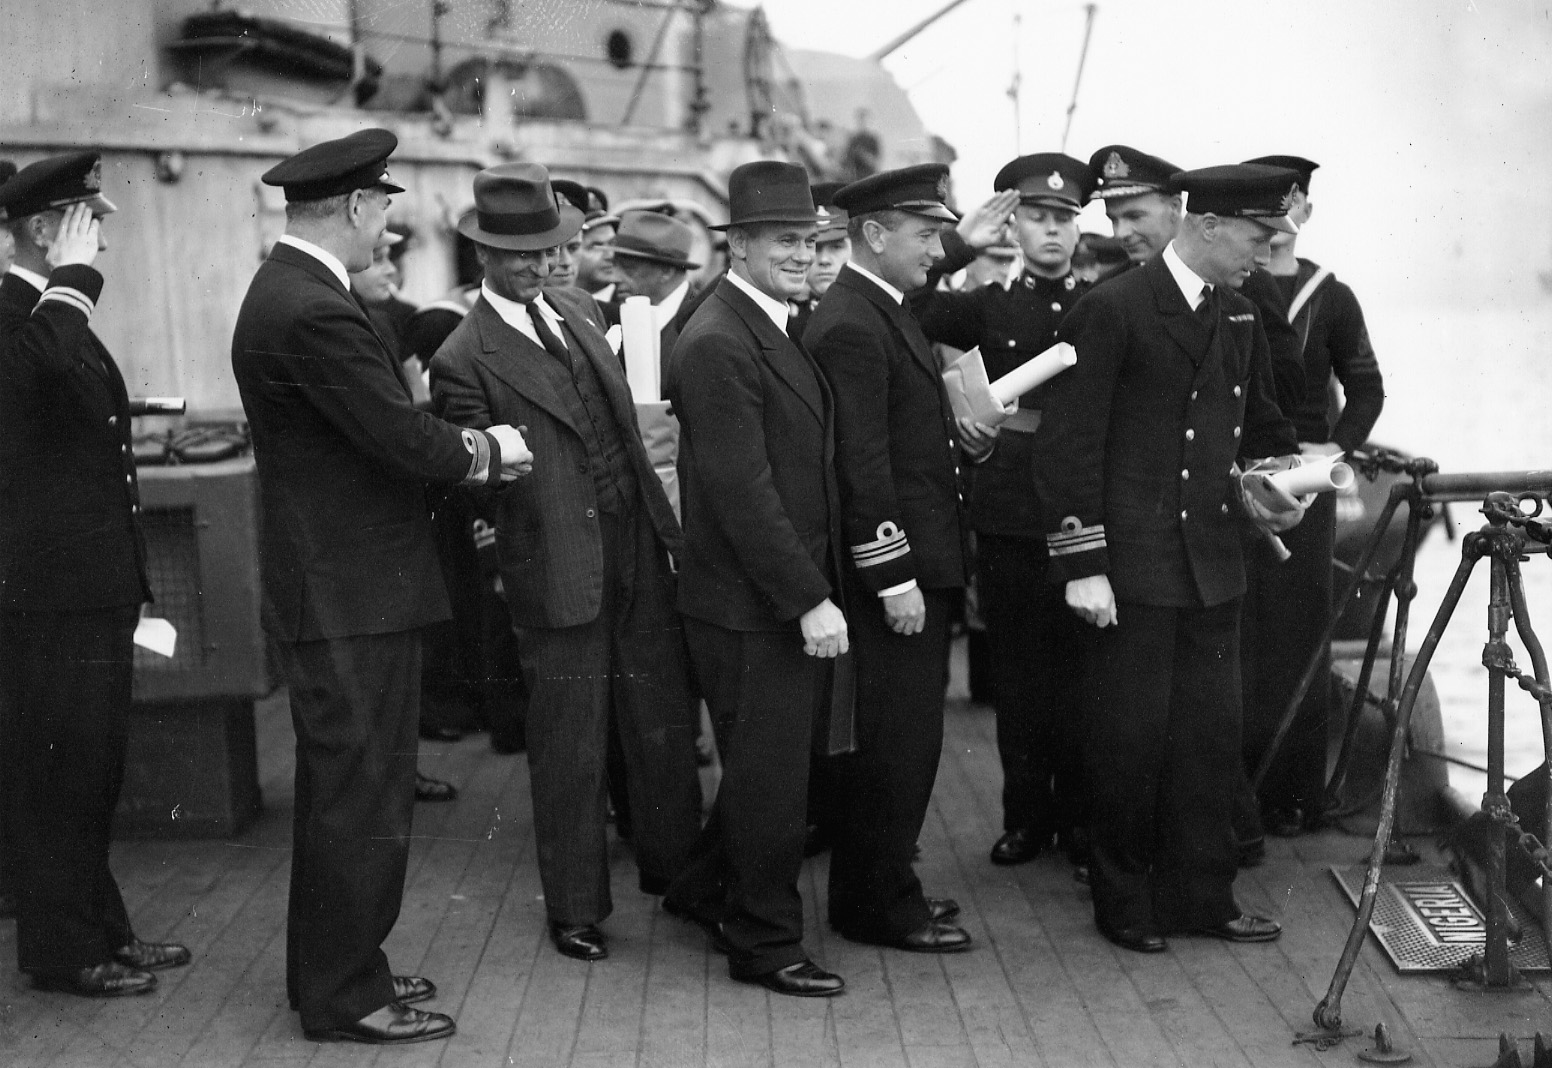 Shortly before setting sail, officers take part in a conference regarding Operation Pedestal. Rear Adm. Sir Harold Burrough (second to left) can be seen shaking hands with Captain Dudley Mason of the Ohio.